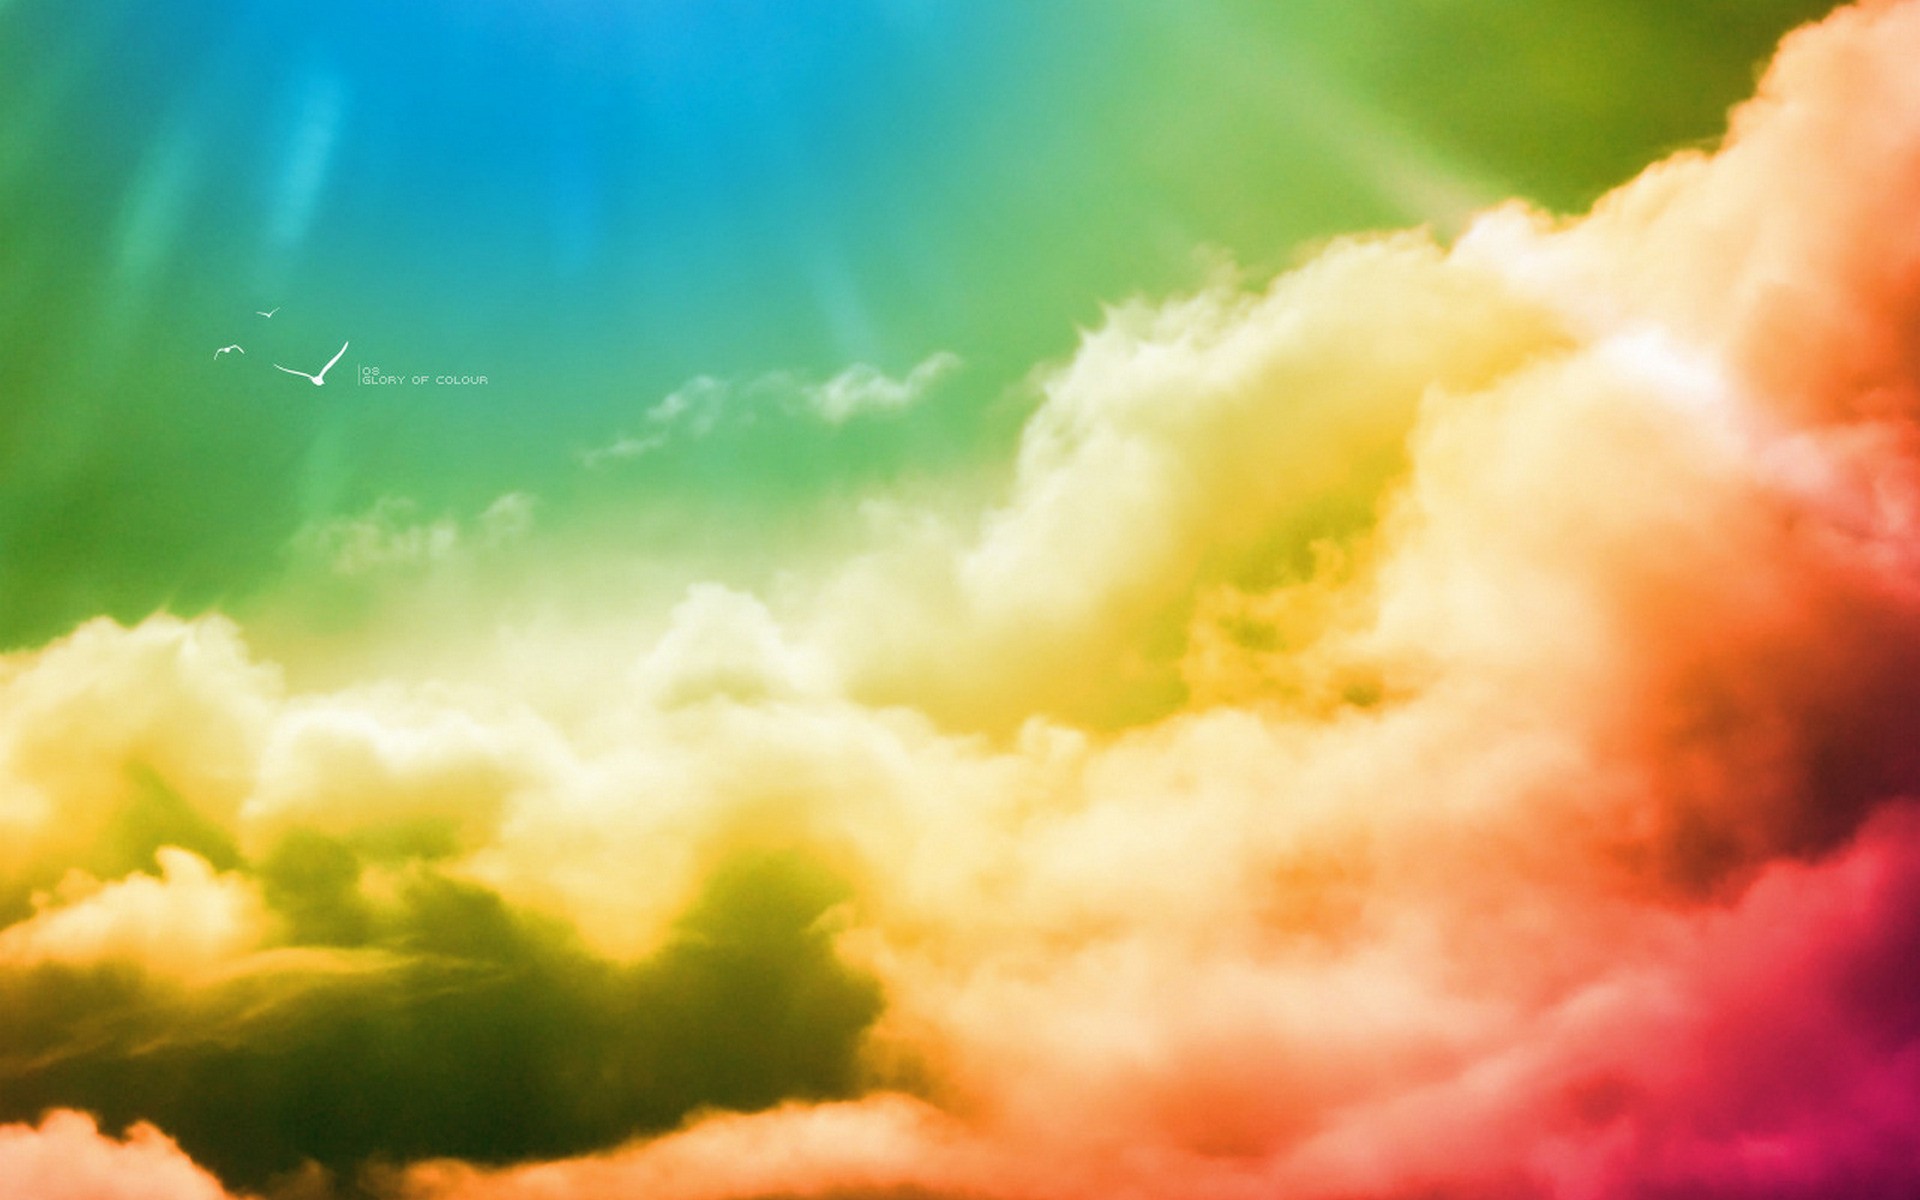 rate select rating give colorful clouds 1 5 give colorful clouds 2